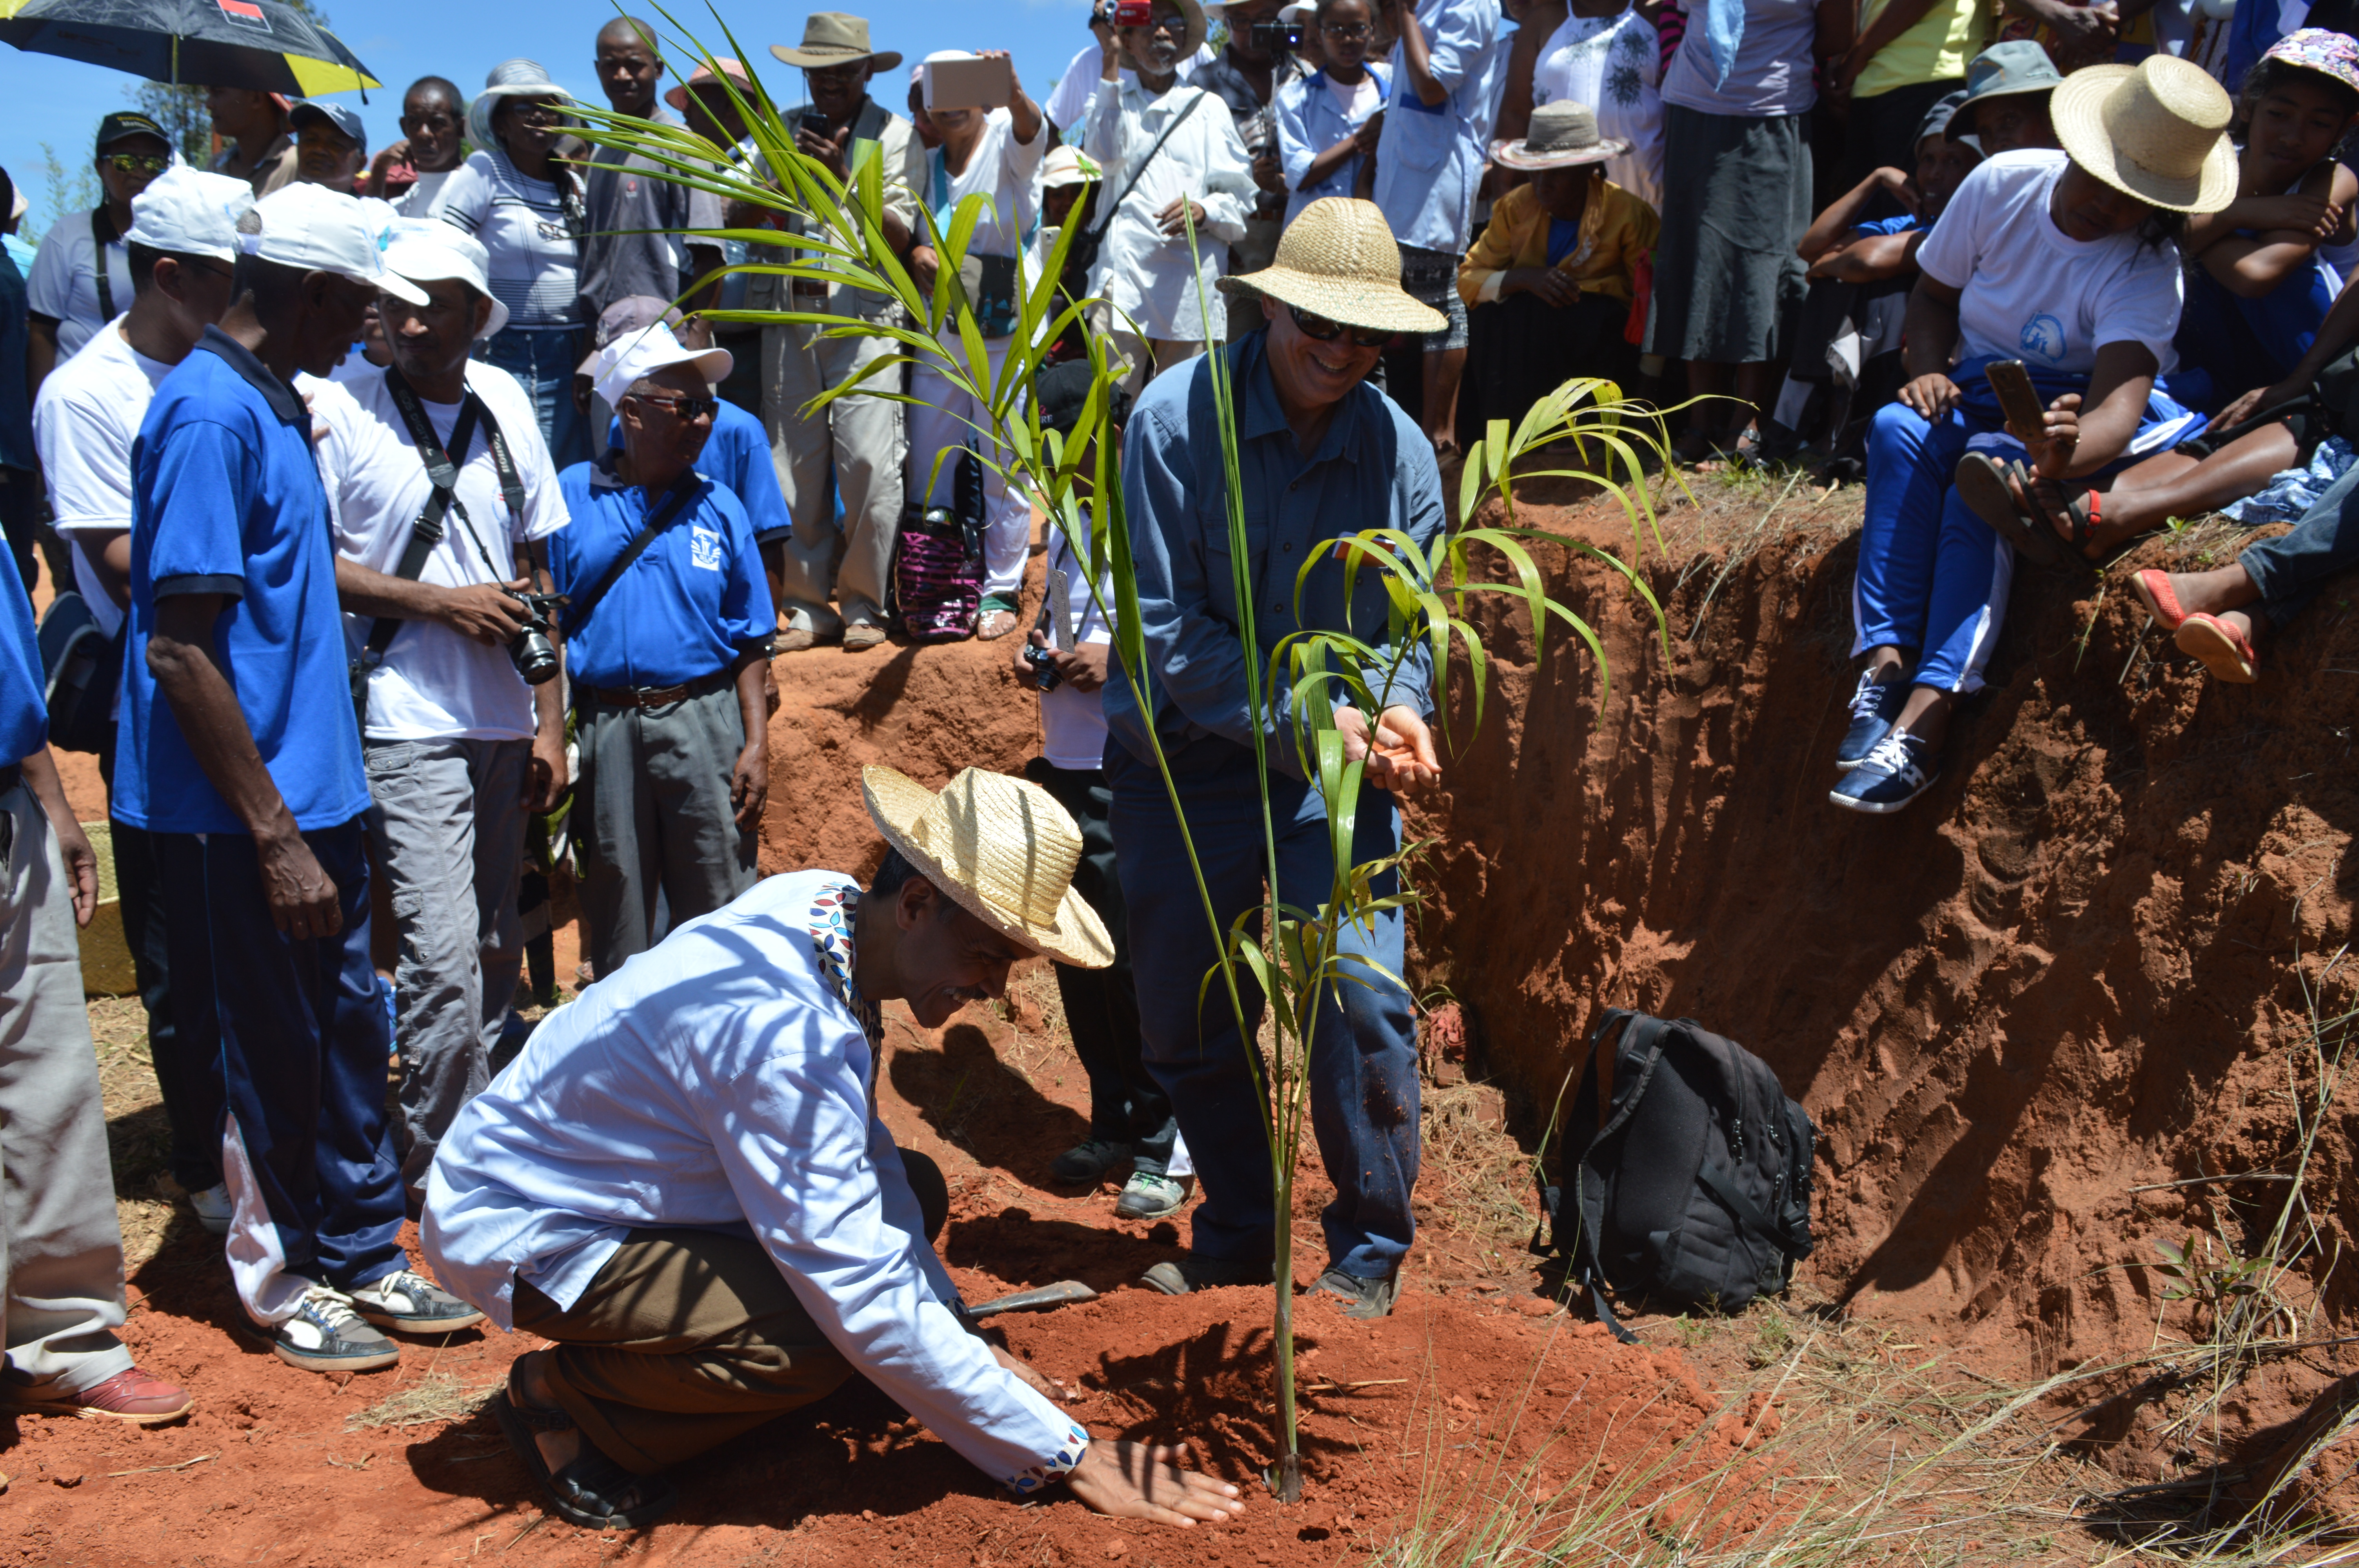 Dan & President Ammi planting native palm FJKM tree planting. Caption: Dan and FJKM President Ammi planting a Dypsis madagascariensis palm at the annual FJKM tree planting event, February 4, 2017